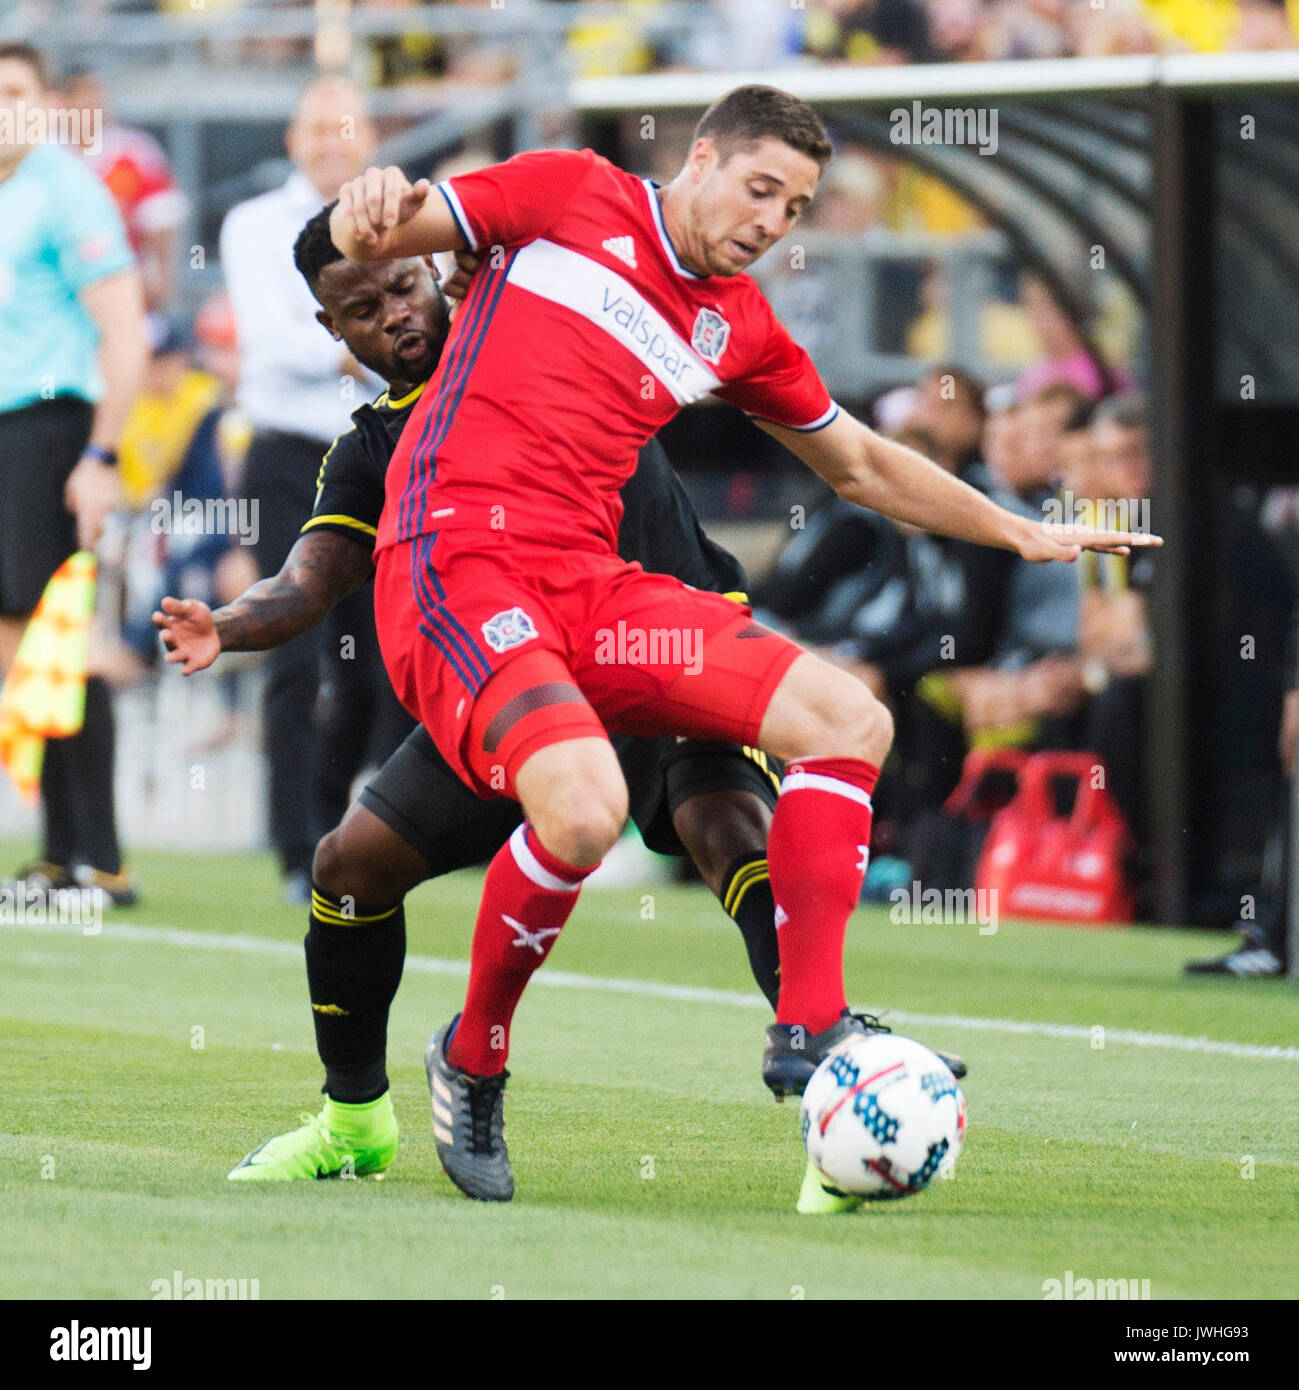 Columbus, U.S.A. 12th Aug, 2017. August 12, 2017: Chicago Fire midfielder Matt Polster (2) and Columbus Crew defender Waylon Francis (14) fight for the ball in their match at Mapfre Stadium. Columbus, Ohio, USA Credit: Brent Clark/Alamy Live News Stock Photo